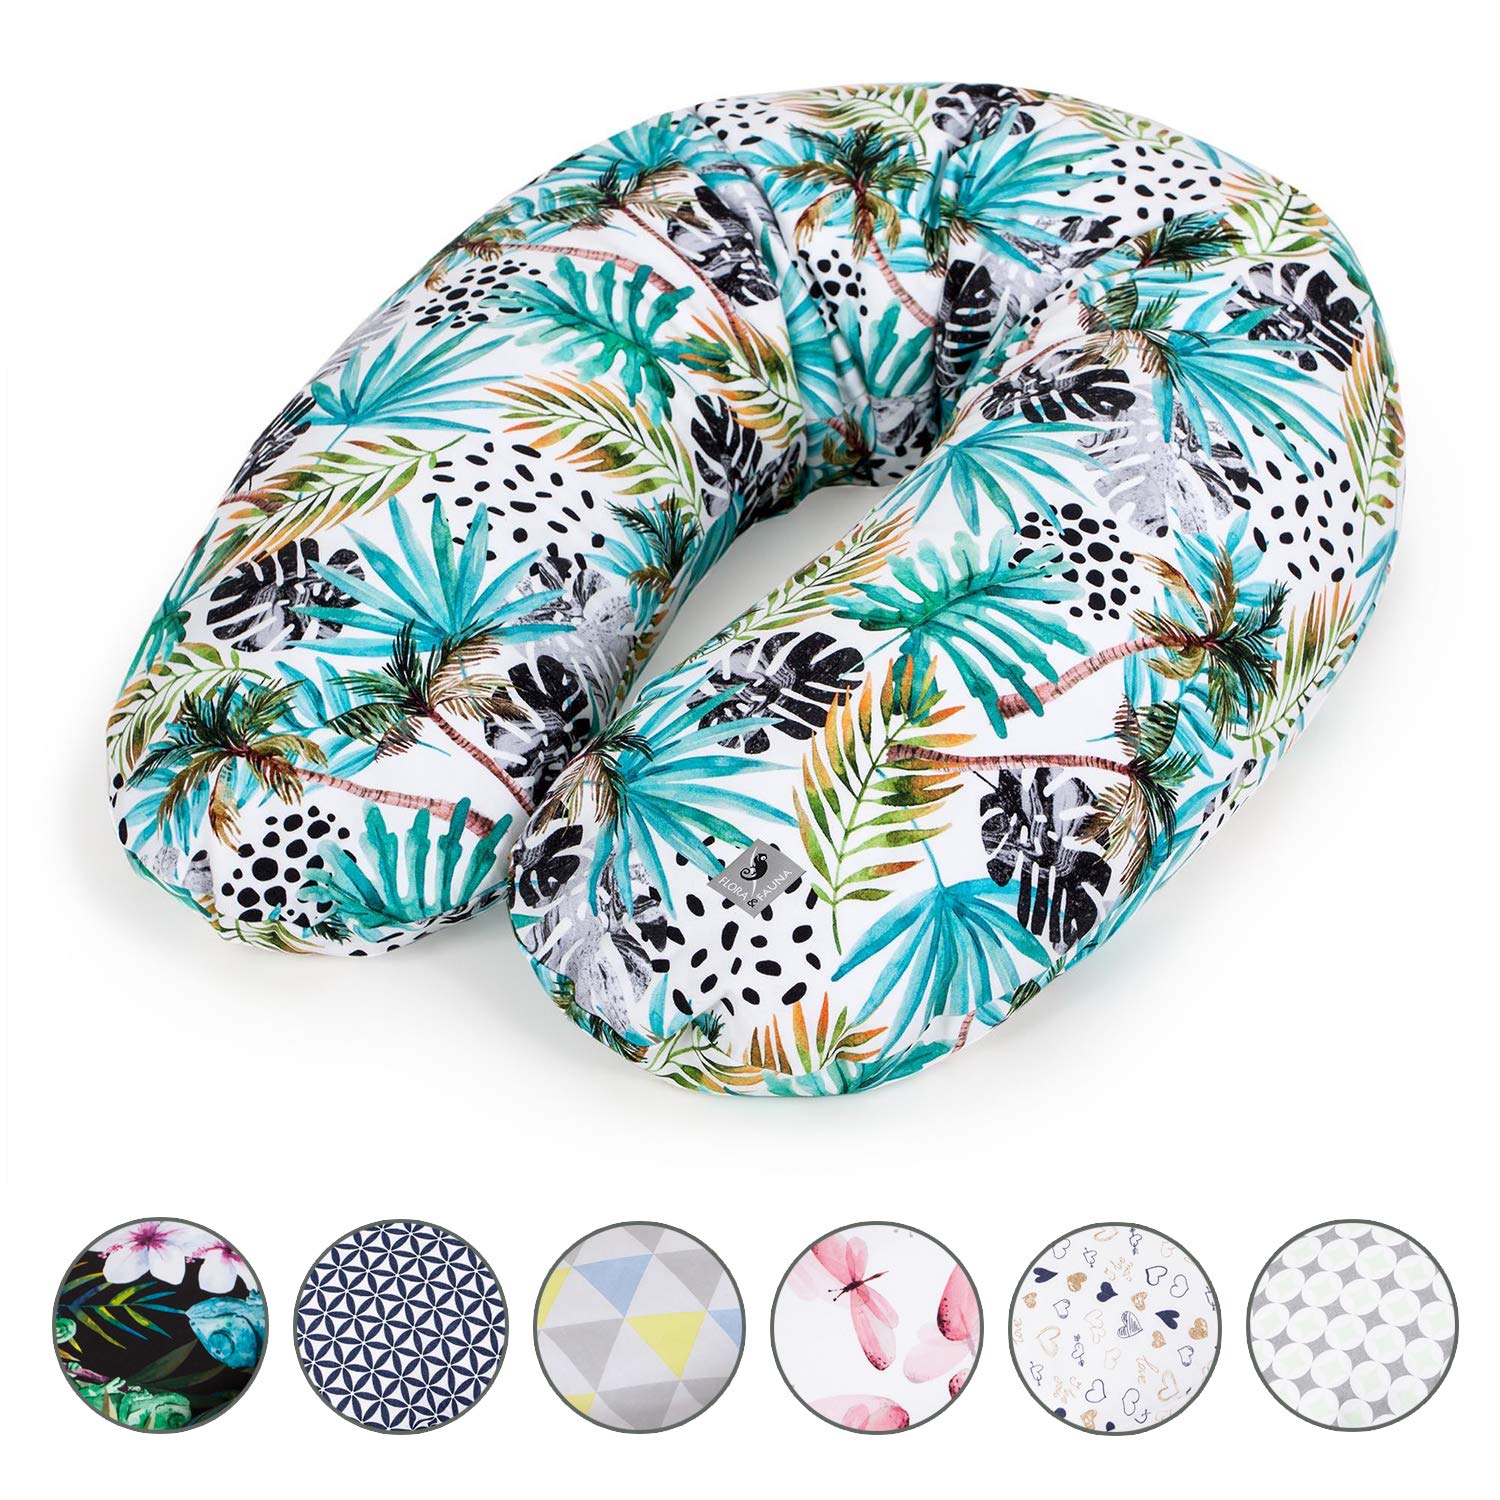 Ceba baby nursing pillow - 100 % cotton maternity pillow with EPS micro beads - certified according to Oeko-Tex Standard 100 - anti-allergic, child safe, comfortable - length 190 cm, multi